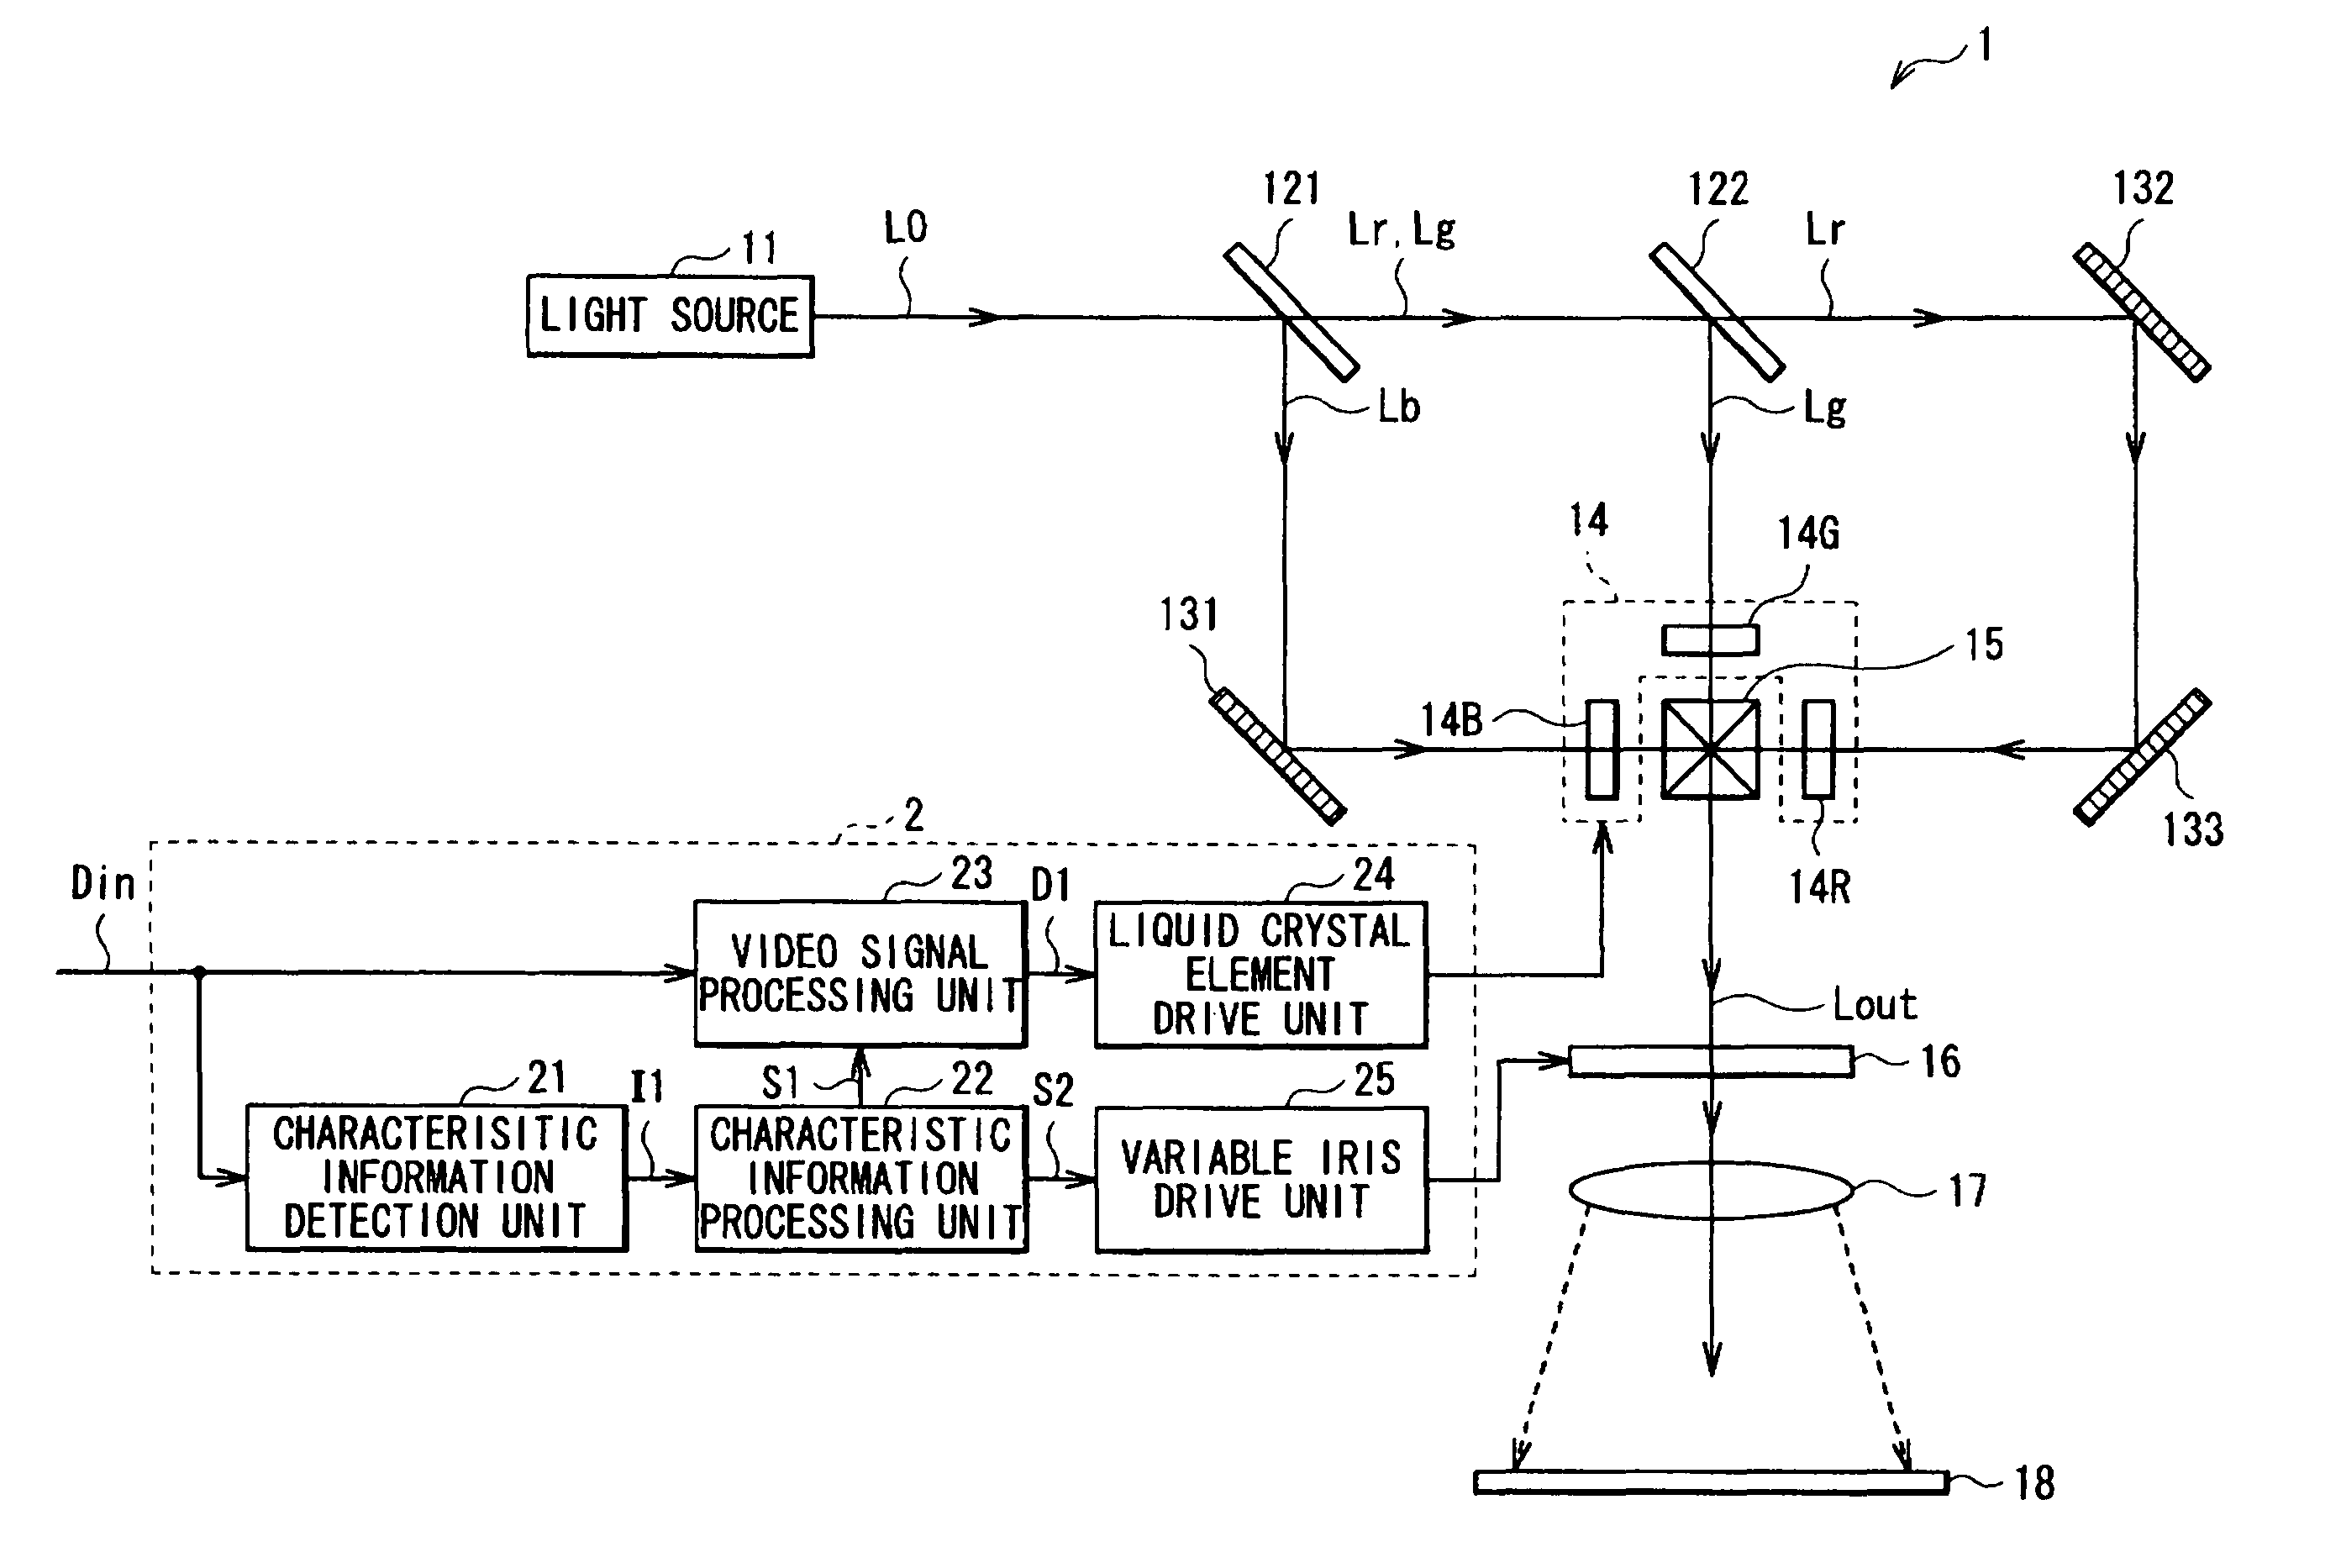 Image display apparatus featuring improved contrast